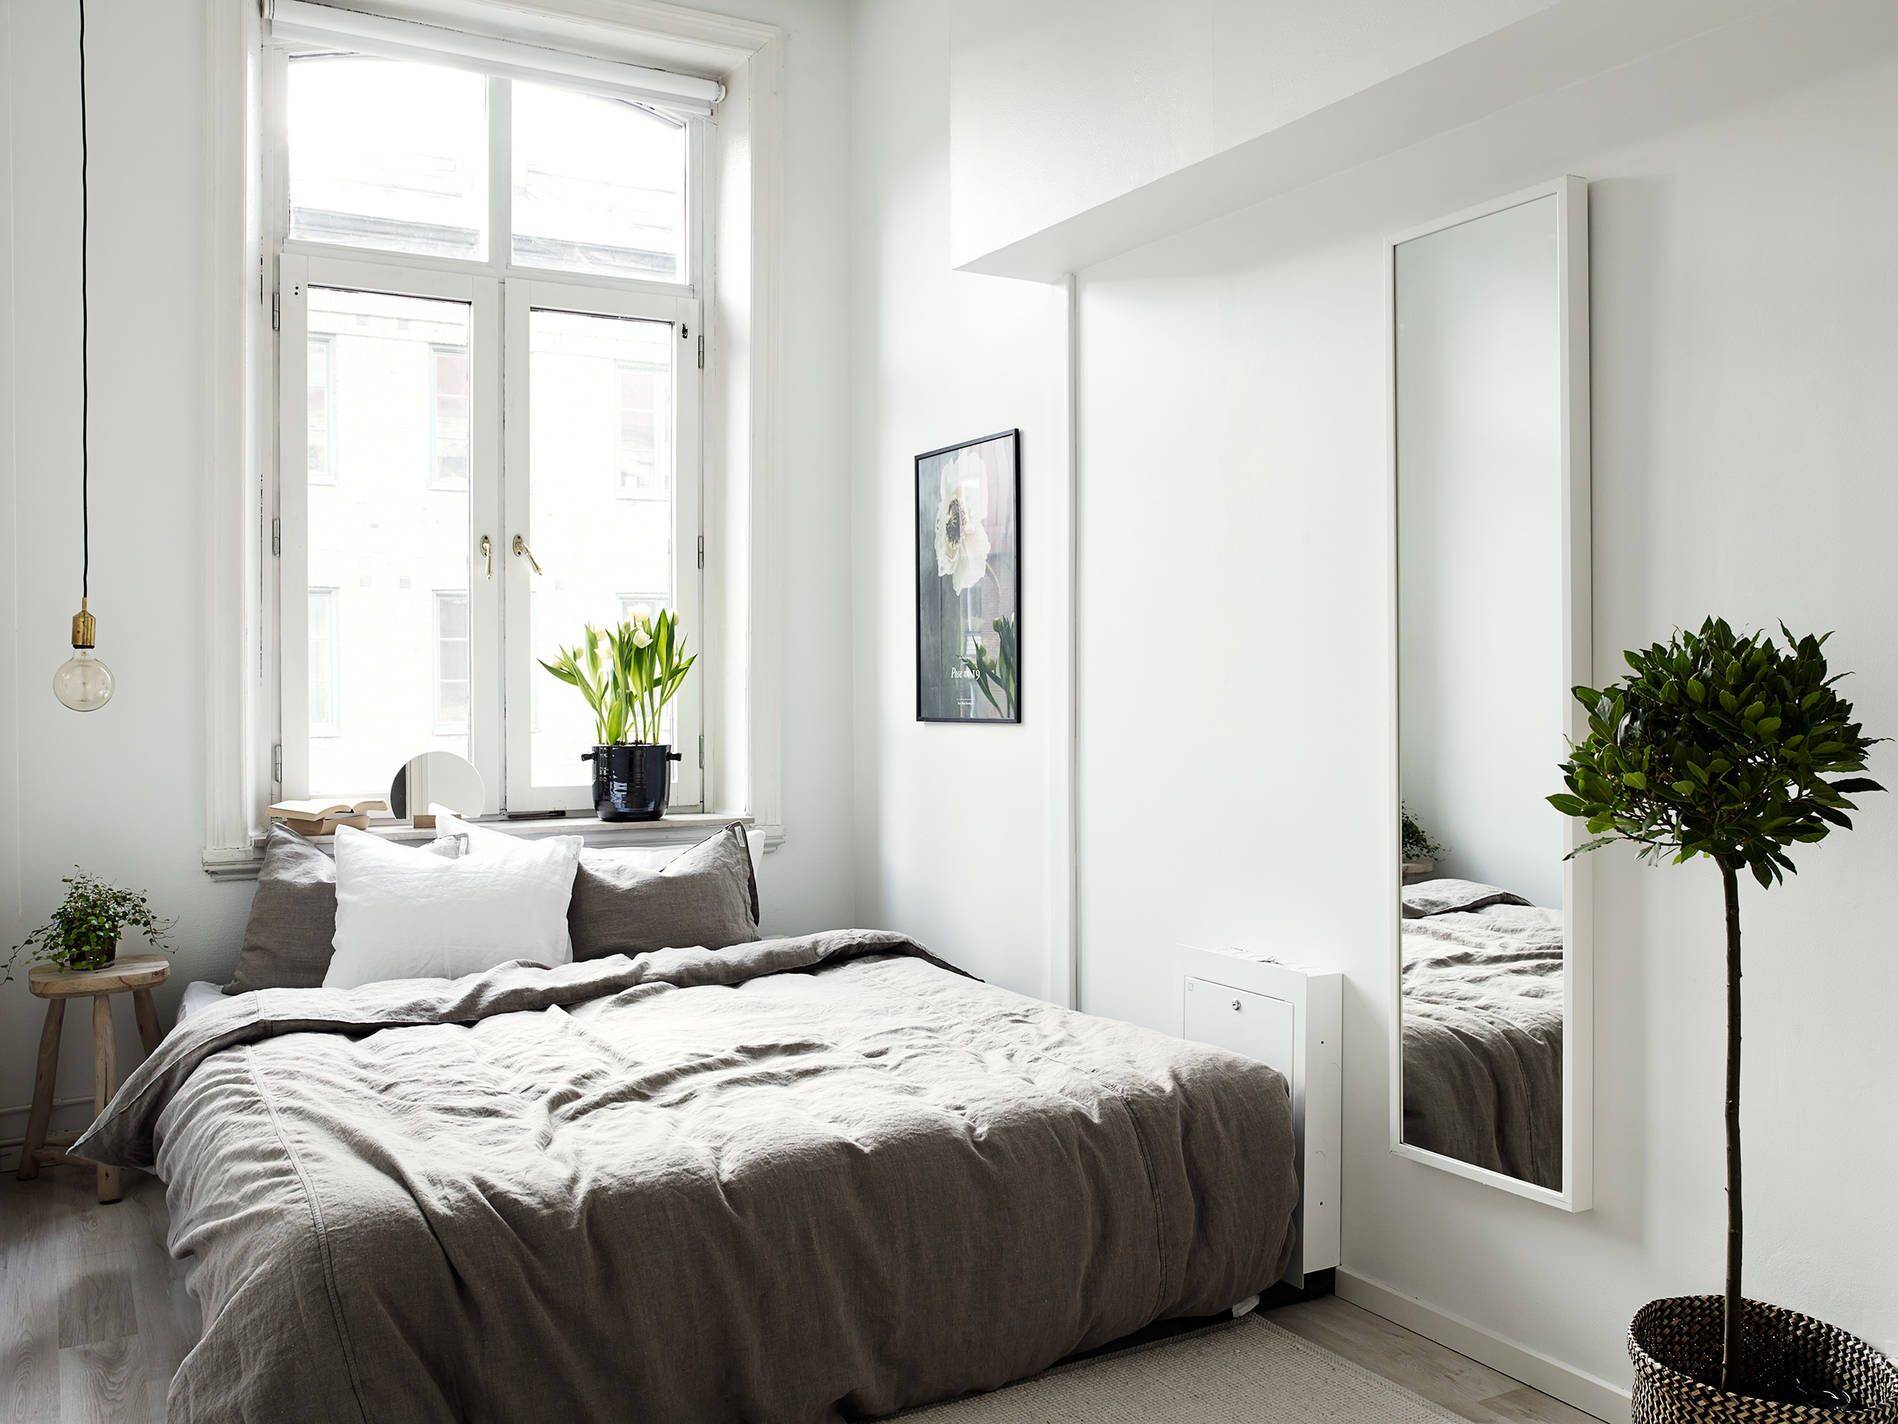 Low bed is perfect selection for a Scandinavian bedroom